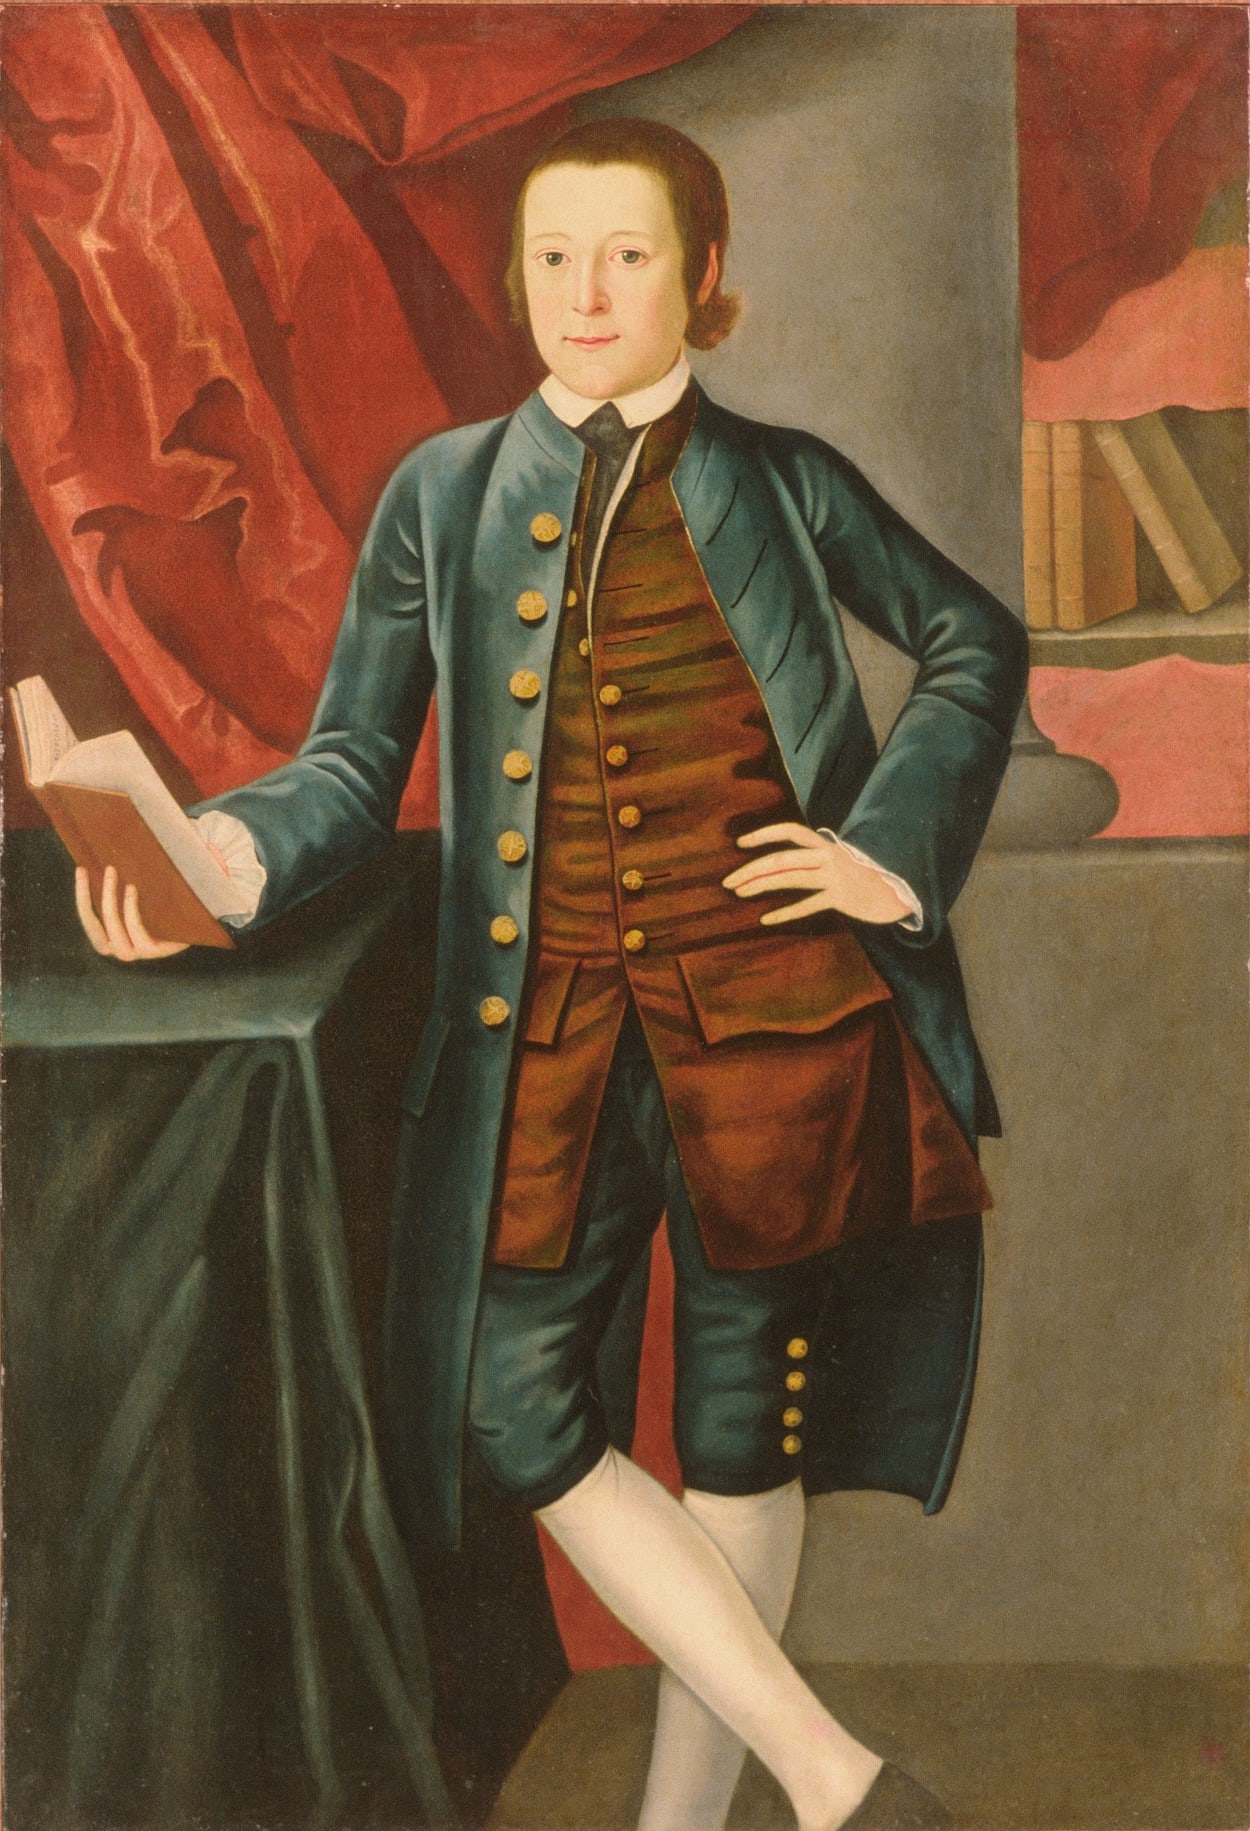 Boy of the Crossfield Family (Possibly Richard Crossfield), 1766–68, John Durand, The Metropolitan Museum of Art (article on positive affirmations)